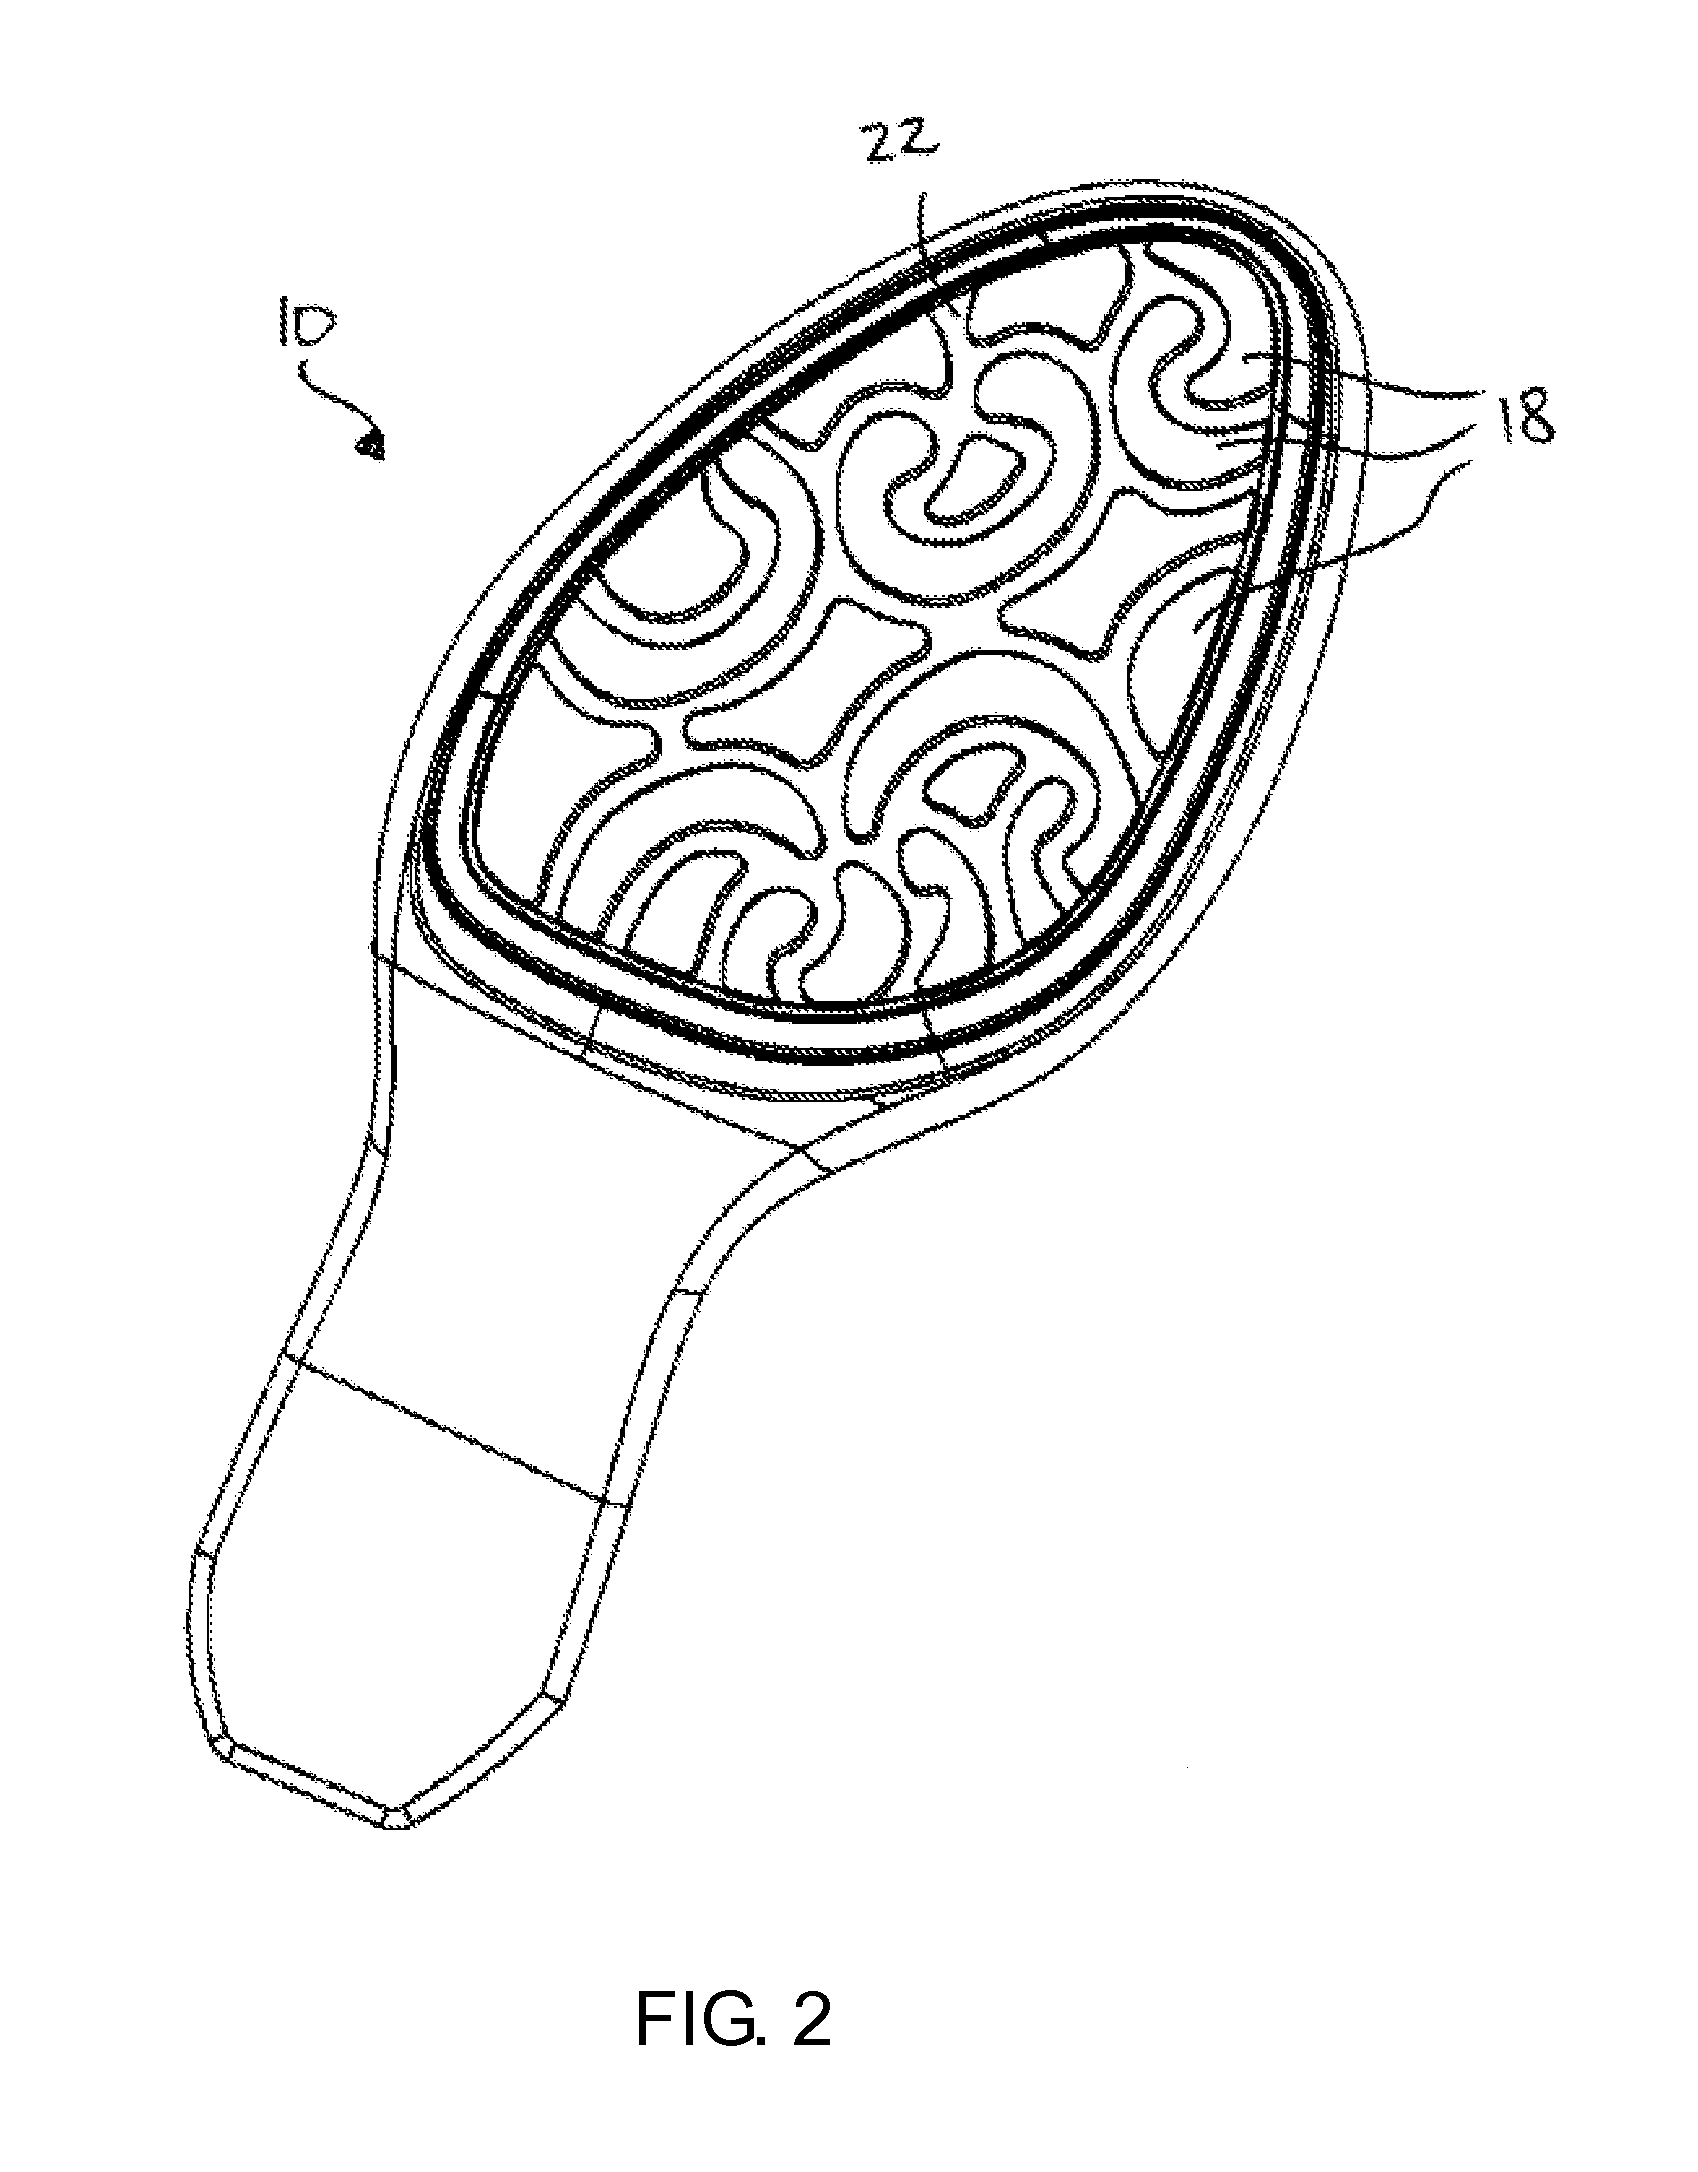 Method for fabricating a footwear sole